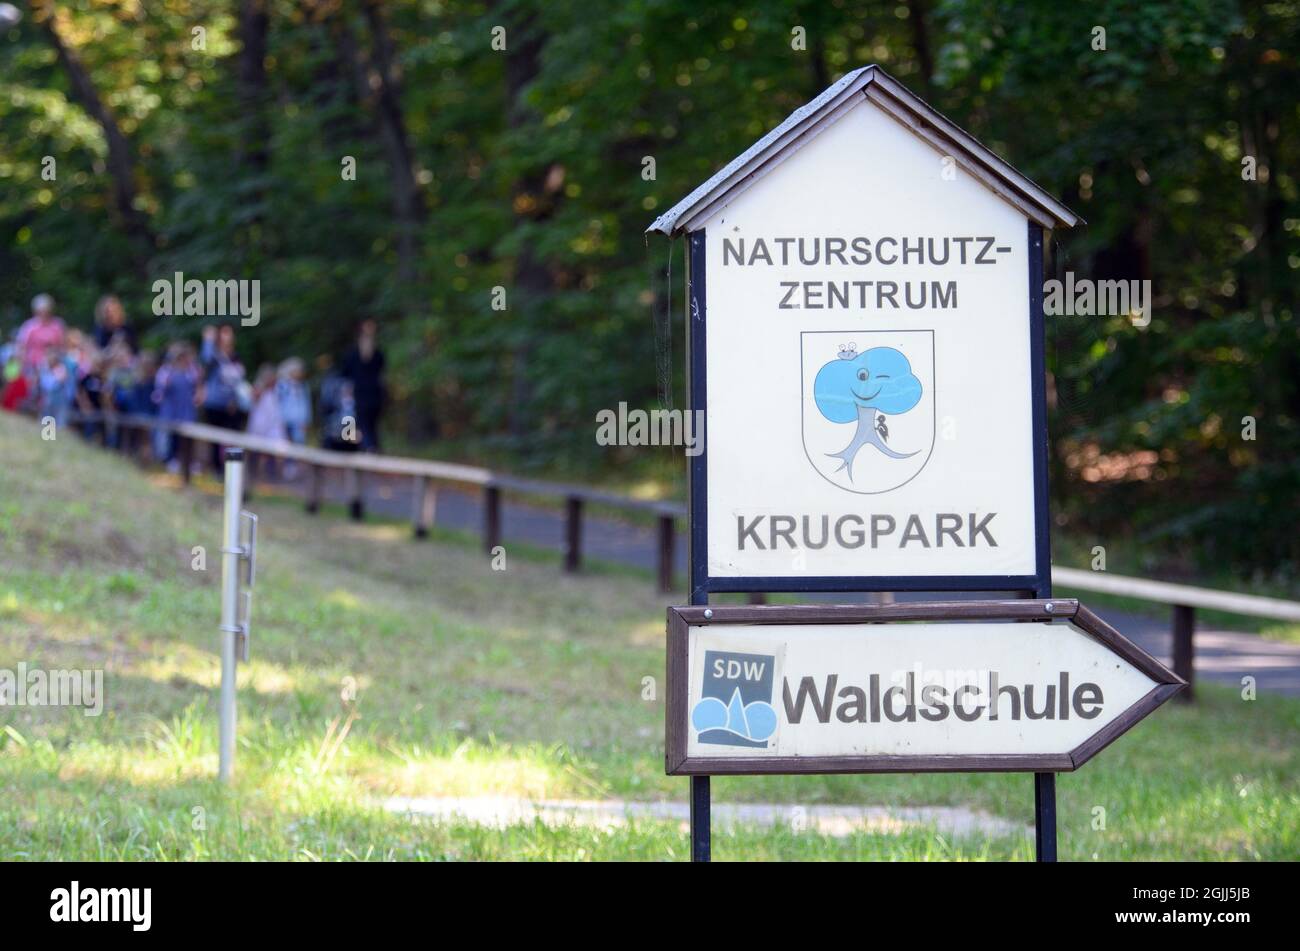 Brandenburg, Germany. September 10 2021: : A sign stands in front of the entrance to the Krugpark Nature Conservation Centre in Wilhelmsdorf. The nature conservation centre has a forest school, educational